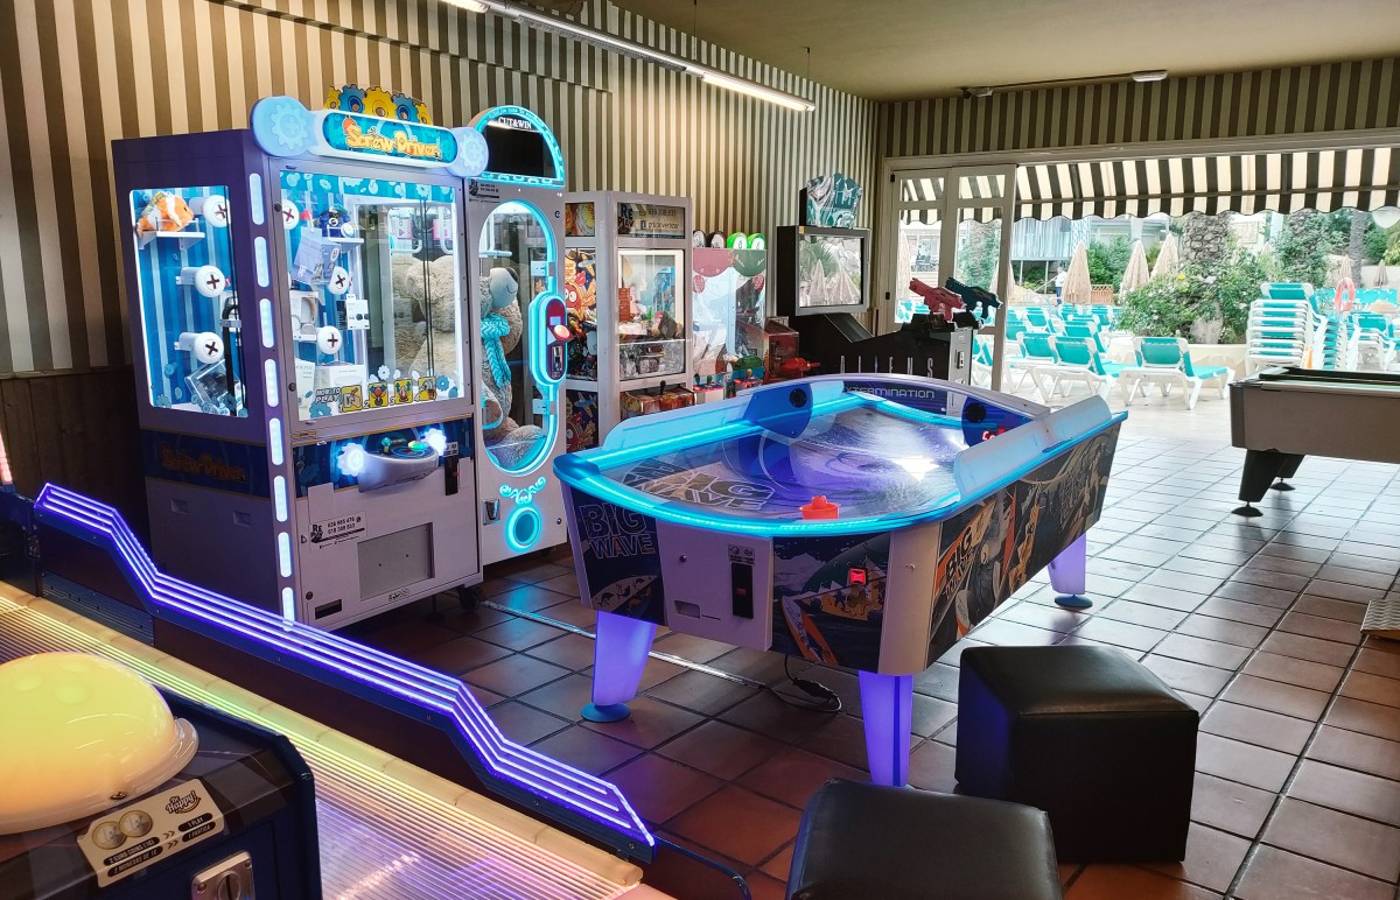 Arcade with air hockey table and other lit up arcade games around.